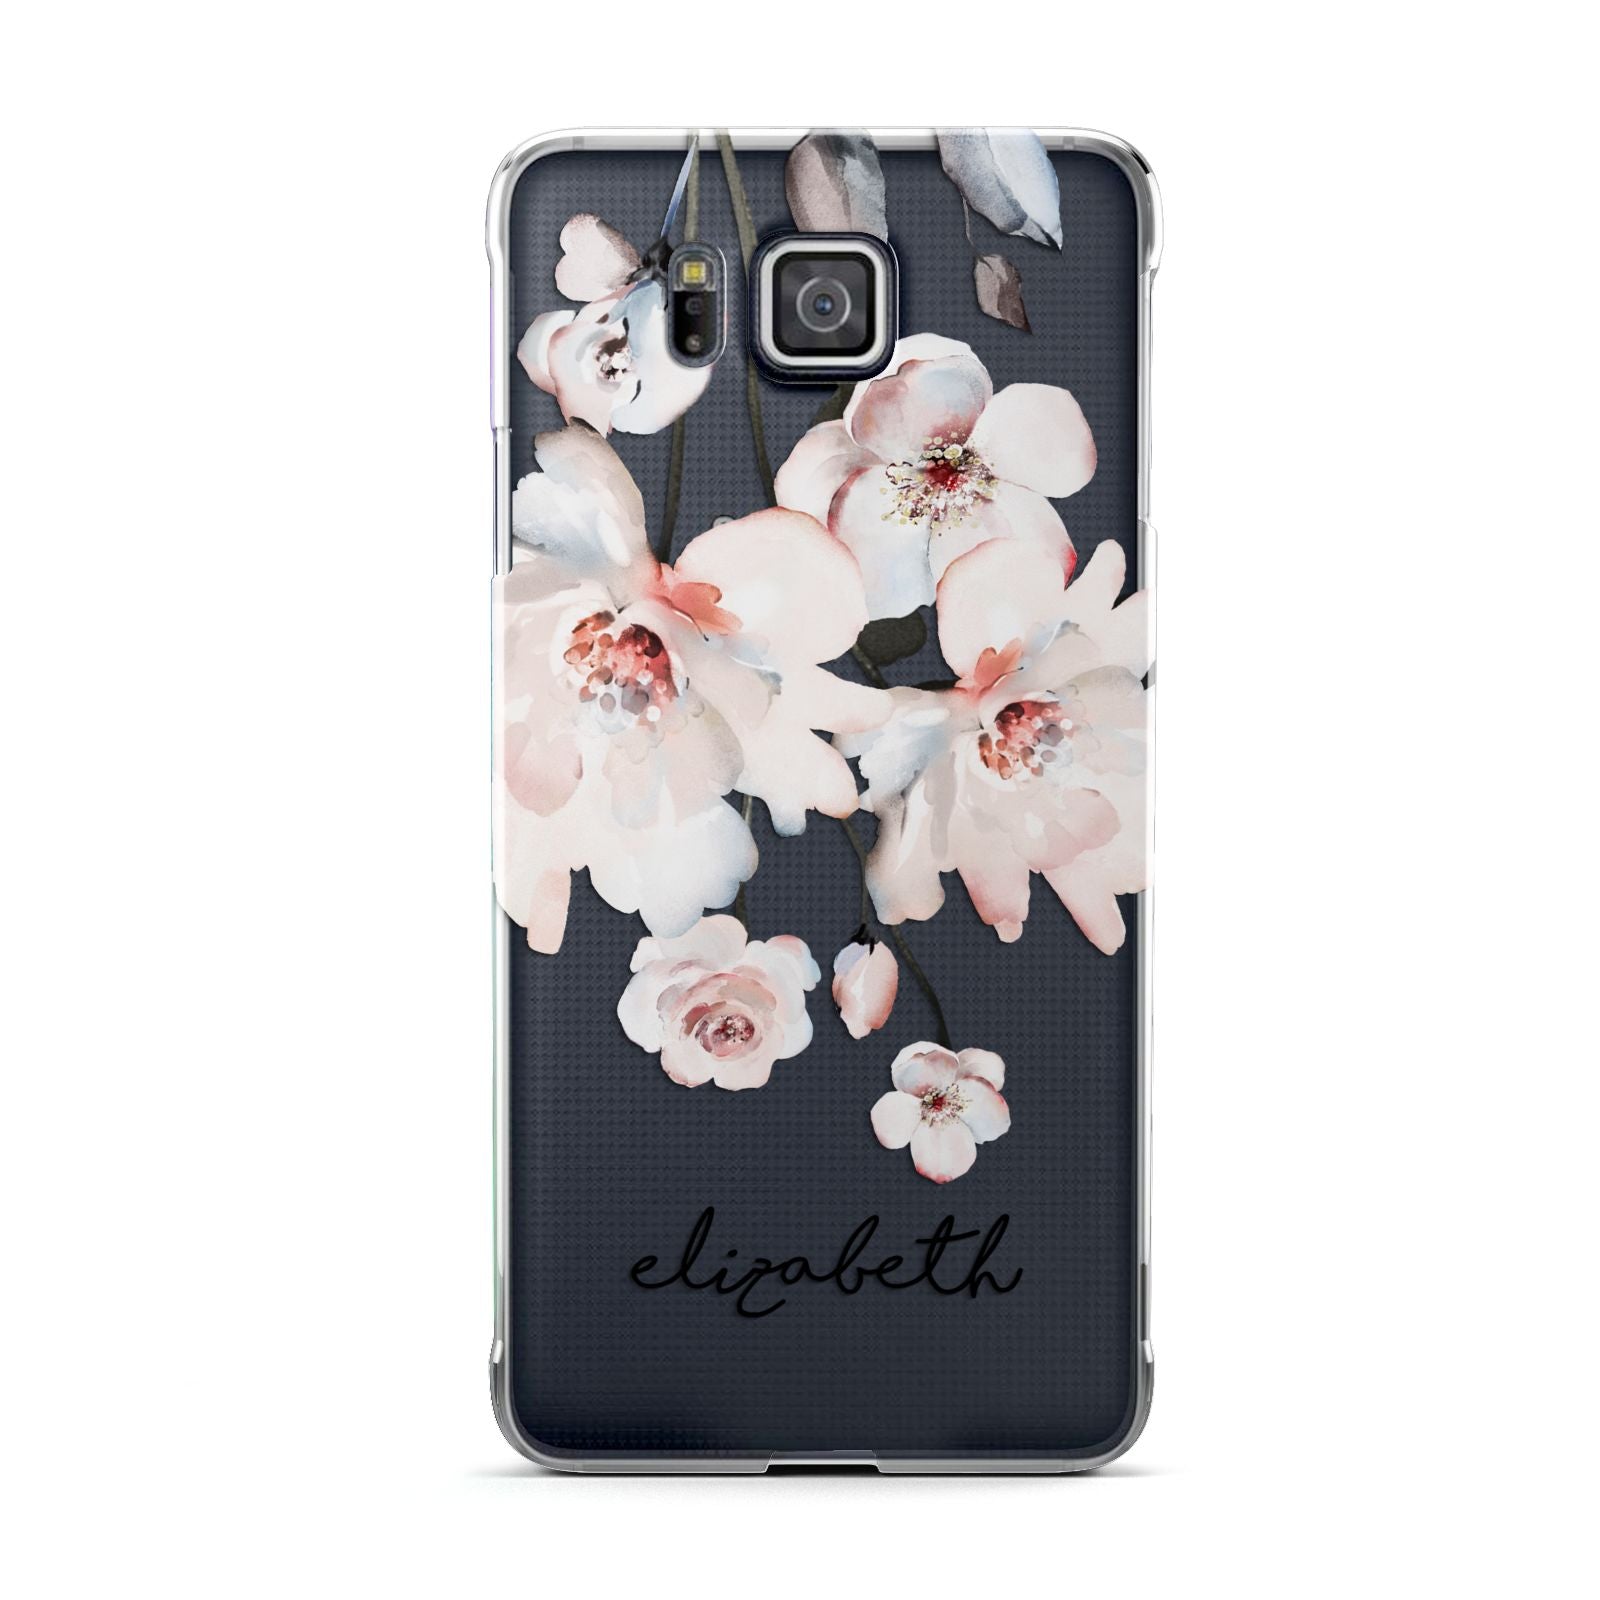 Personalised Name Roses Watercolour Samsung Galaxy Alpha Case